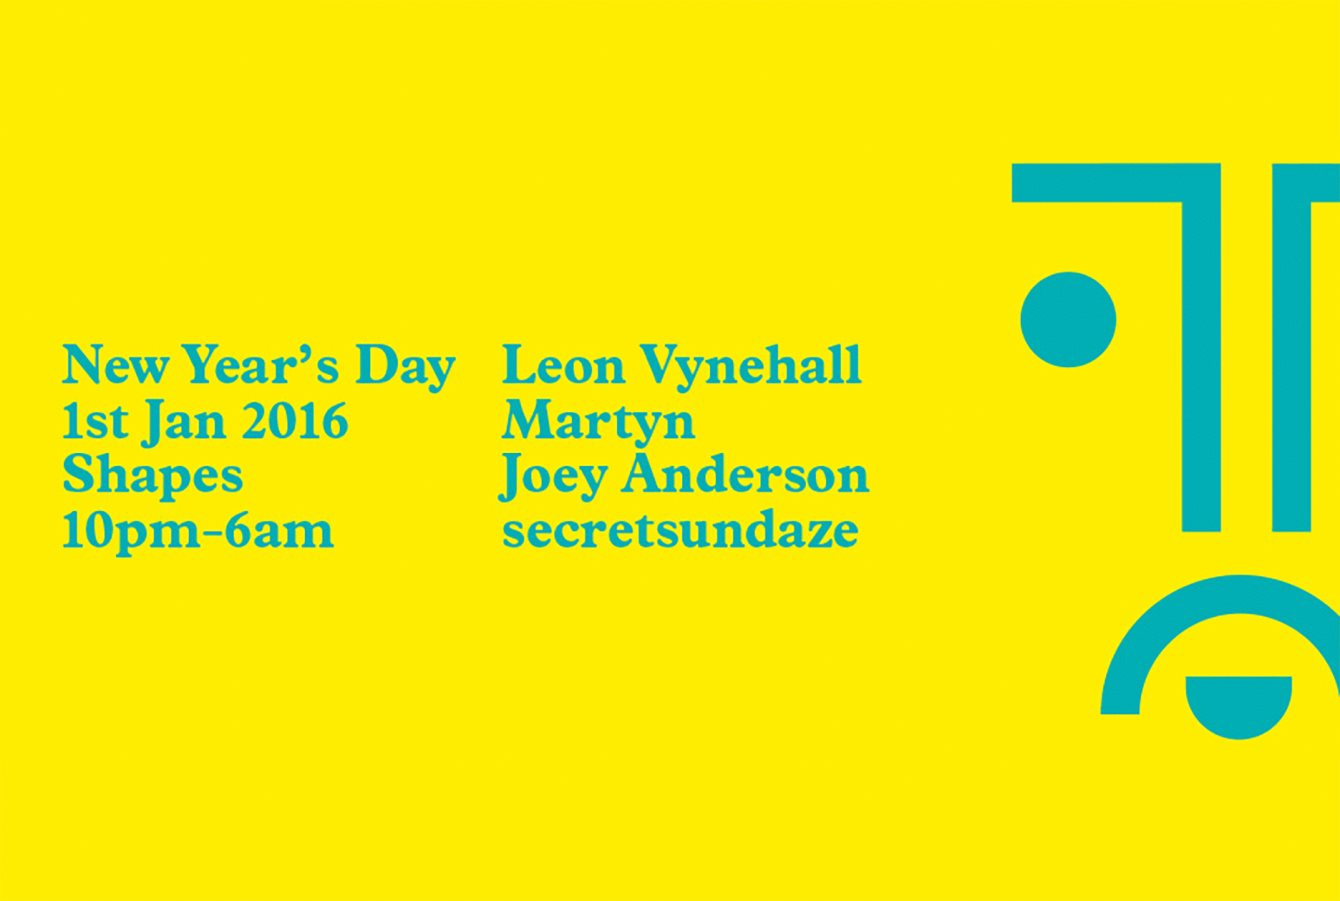 Secretsundaze NYD with Leon Vynehall, Martyn, Joey Anderson, Giles Smith & James Priestley - Flyer front